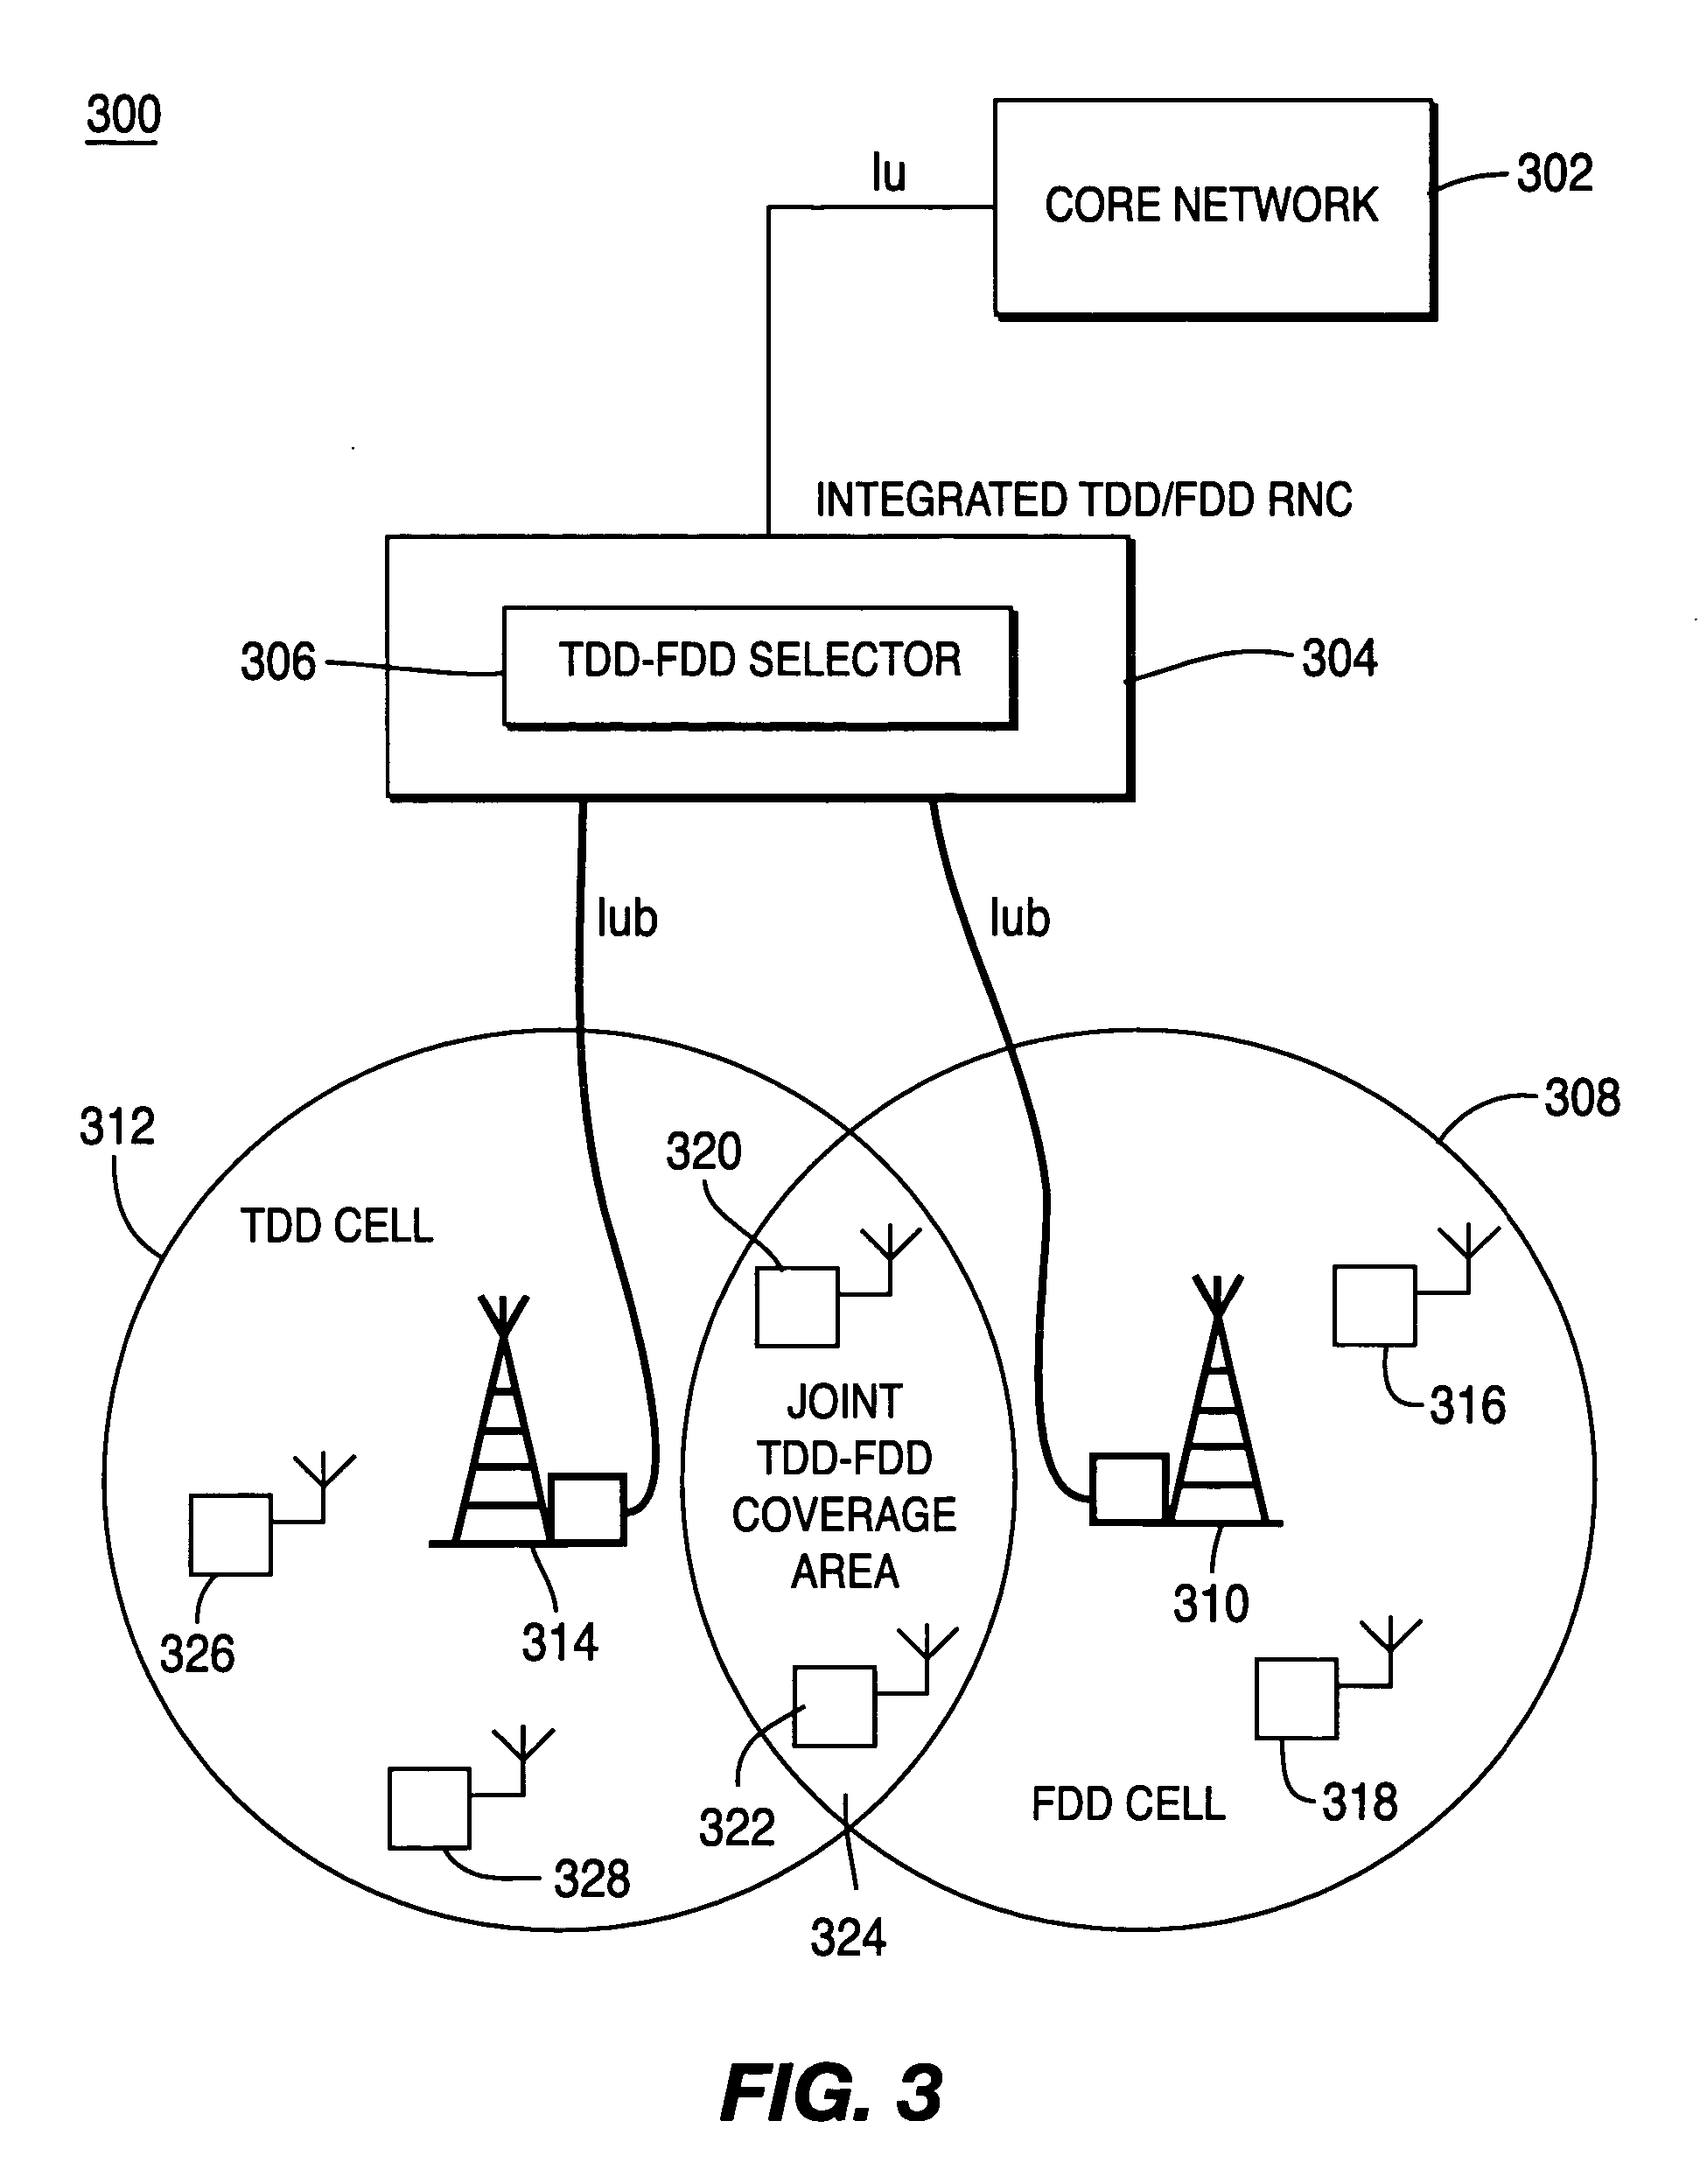 Method and system for integrating resource allocation between time division duplex and frequency division duplex in wireless communication systems